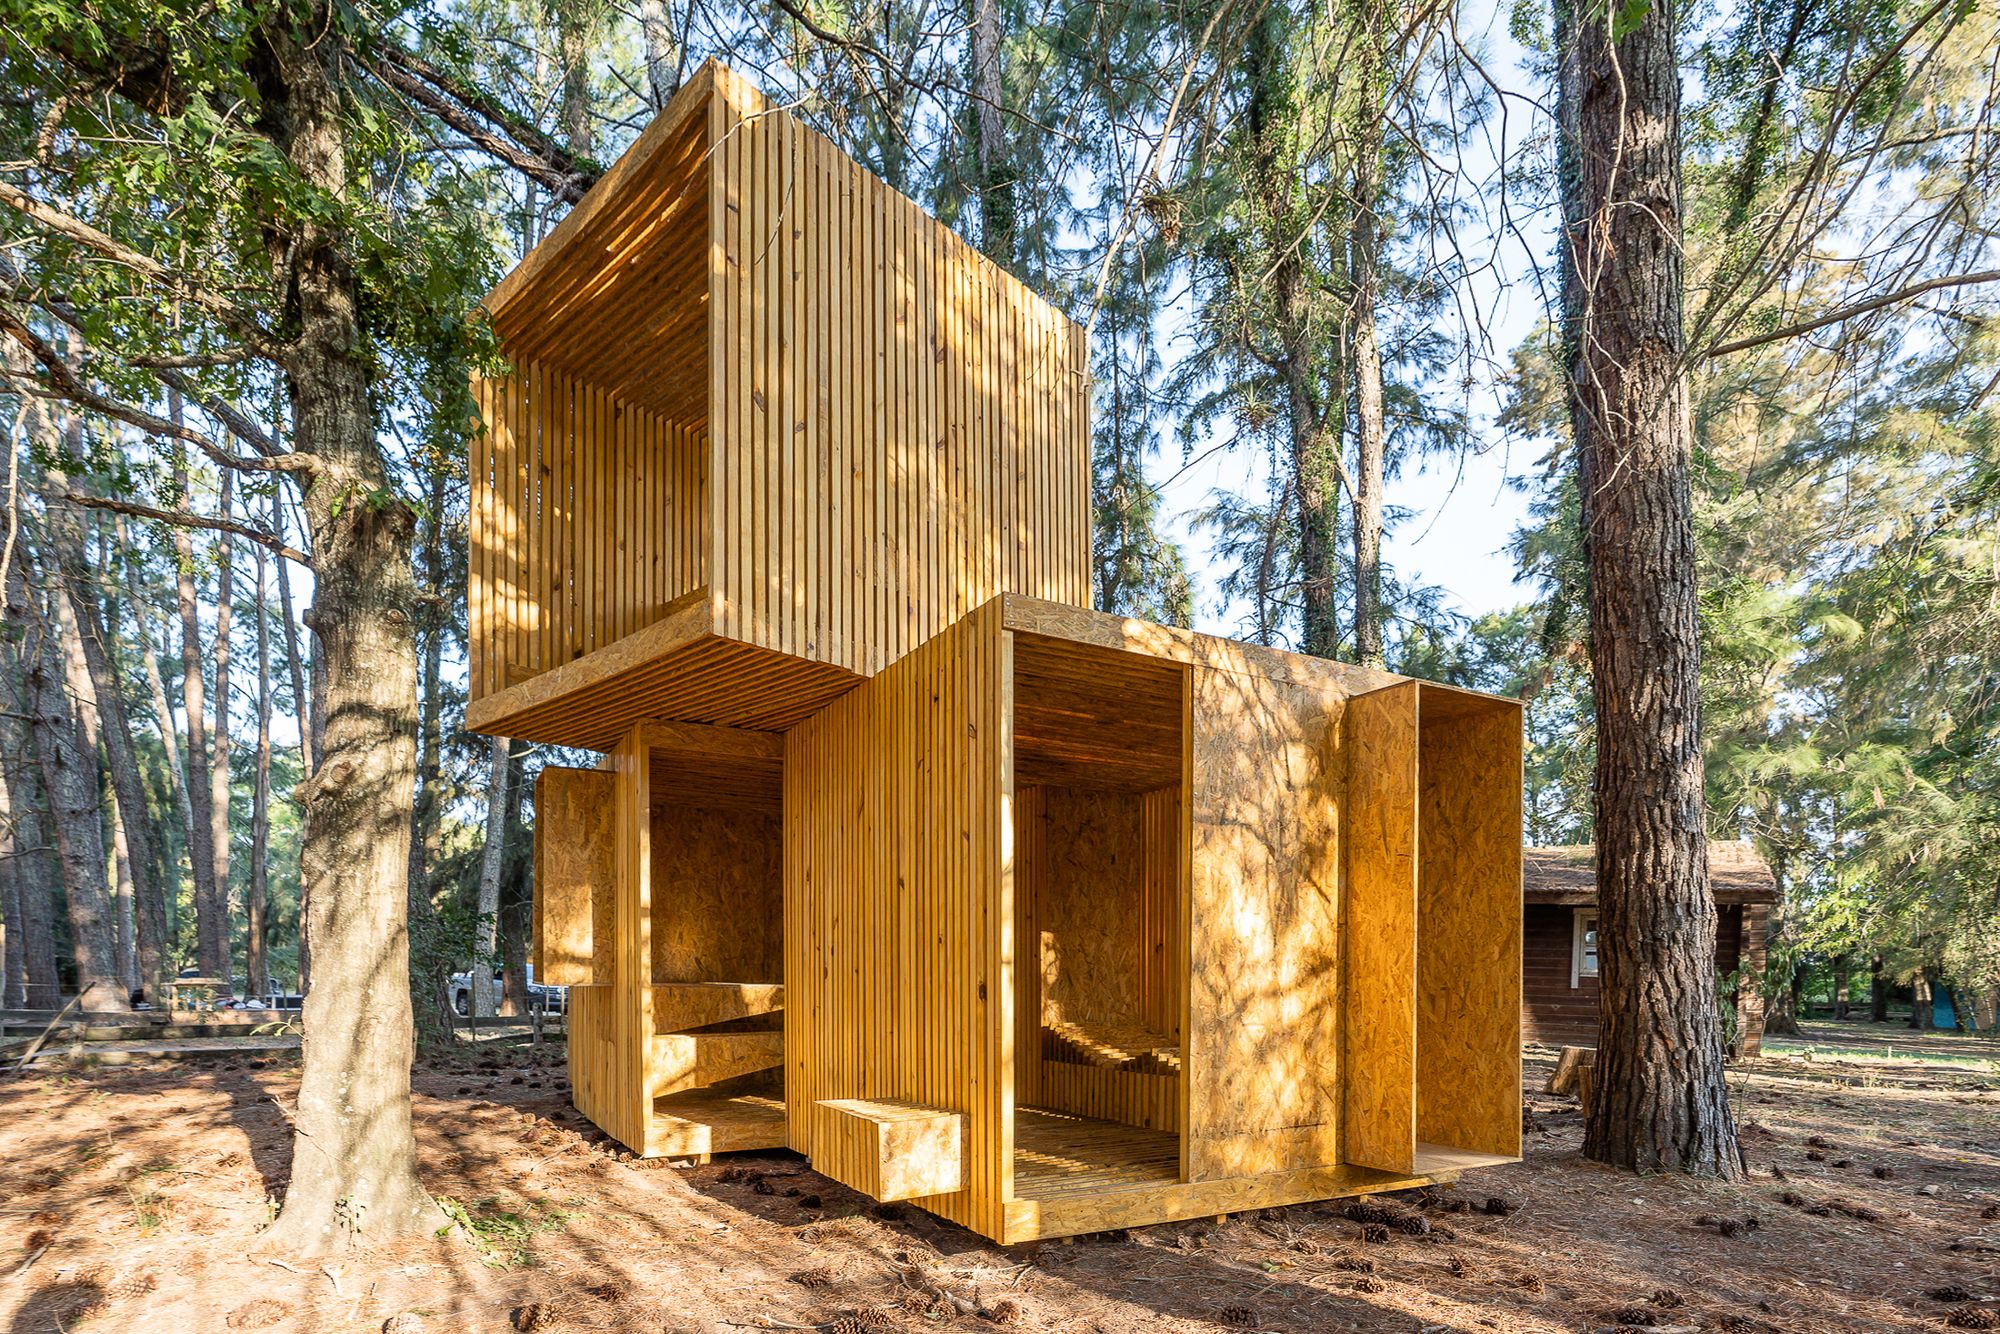 Hungarian architectural festival in Argentina | Hello Wood